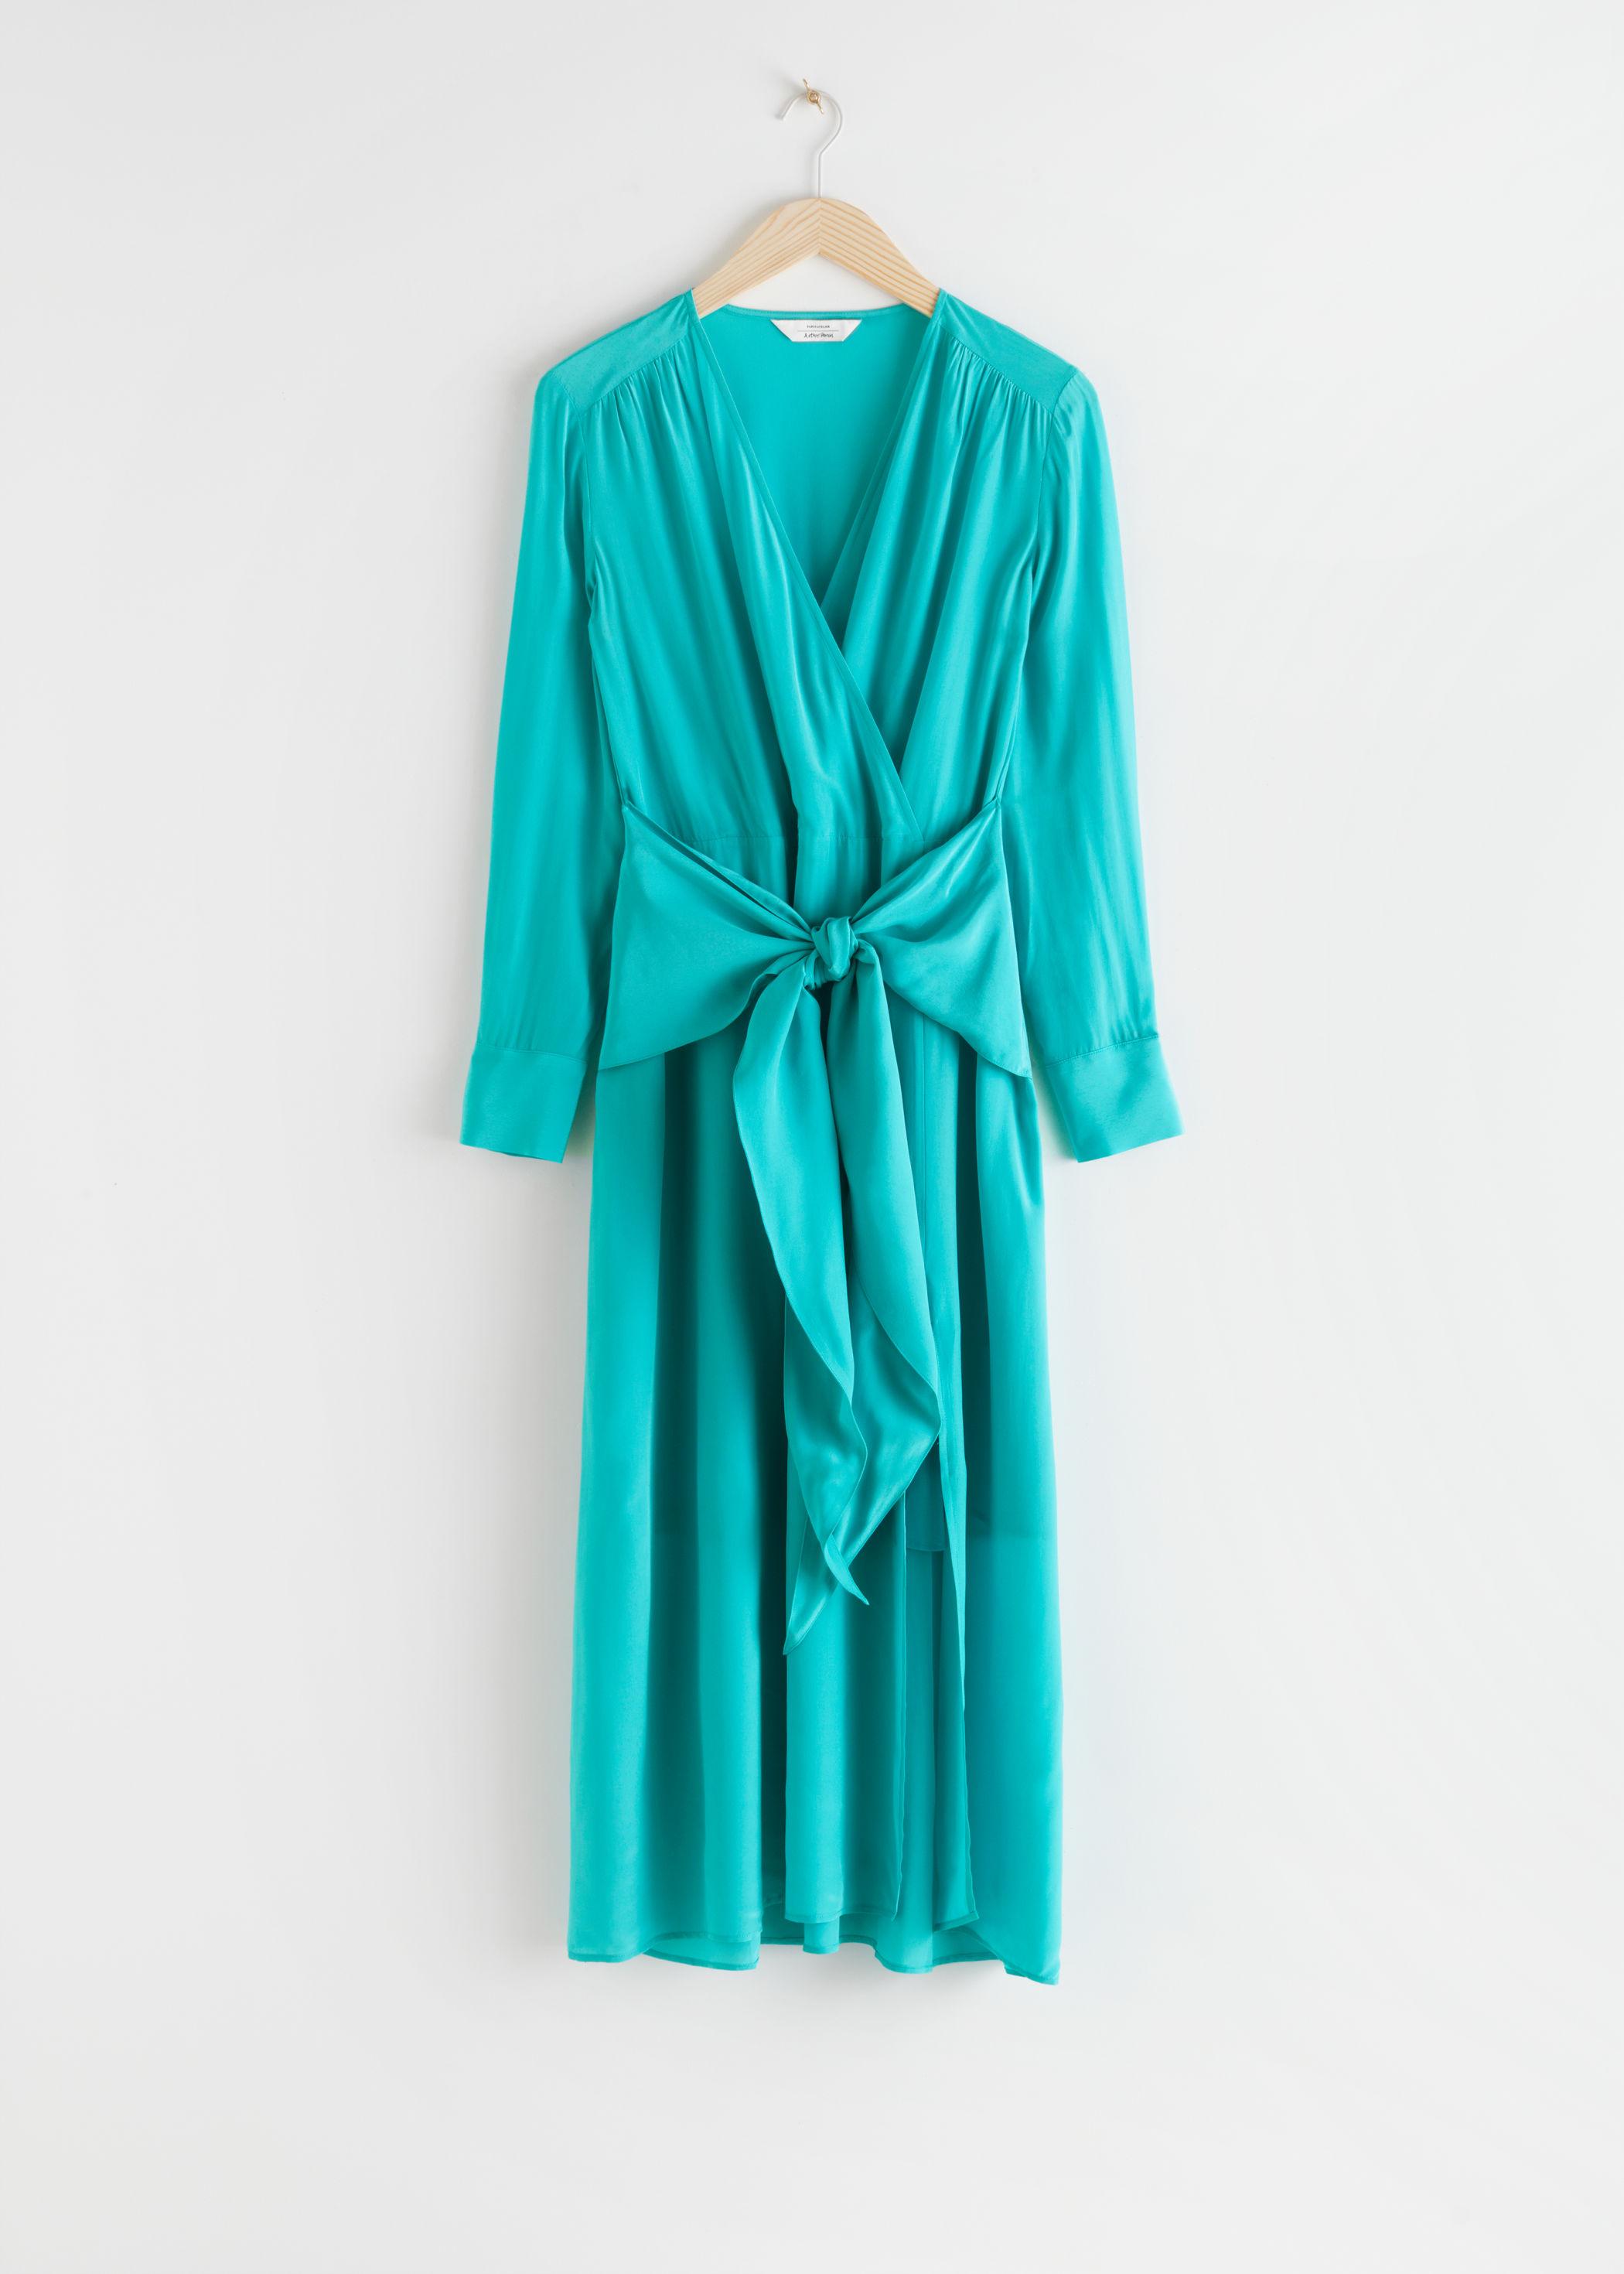 & Other Stories Scarf Tie Flowy Midi Dress in Turquoise (Blue) - Lyst